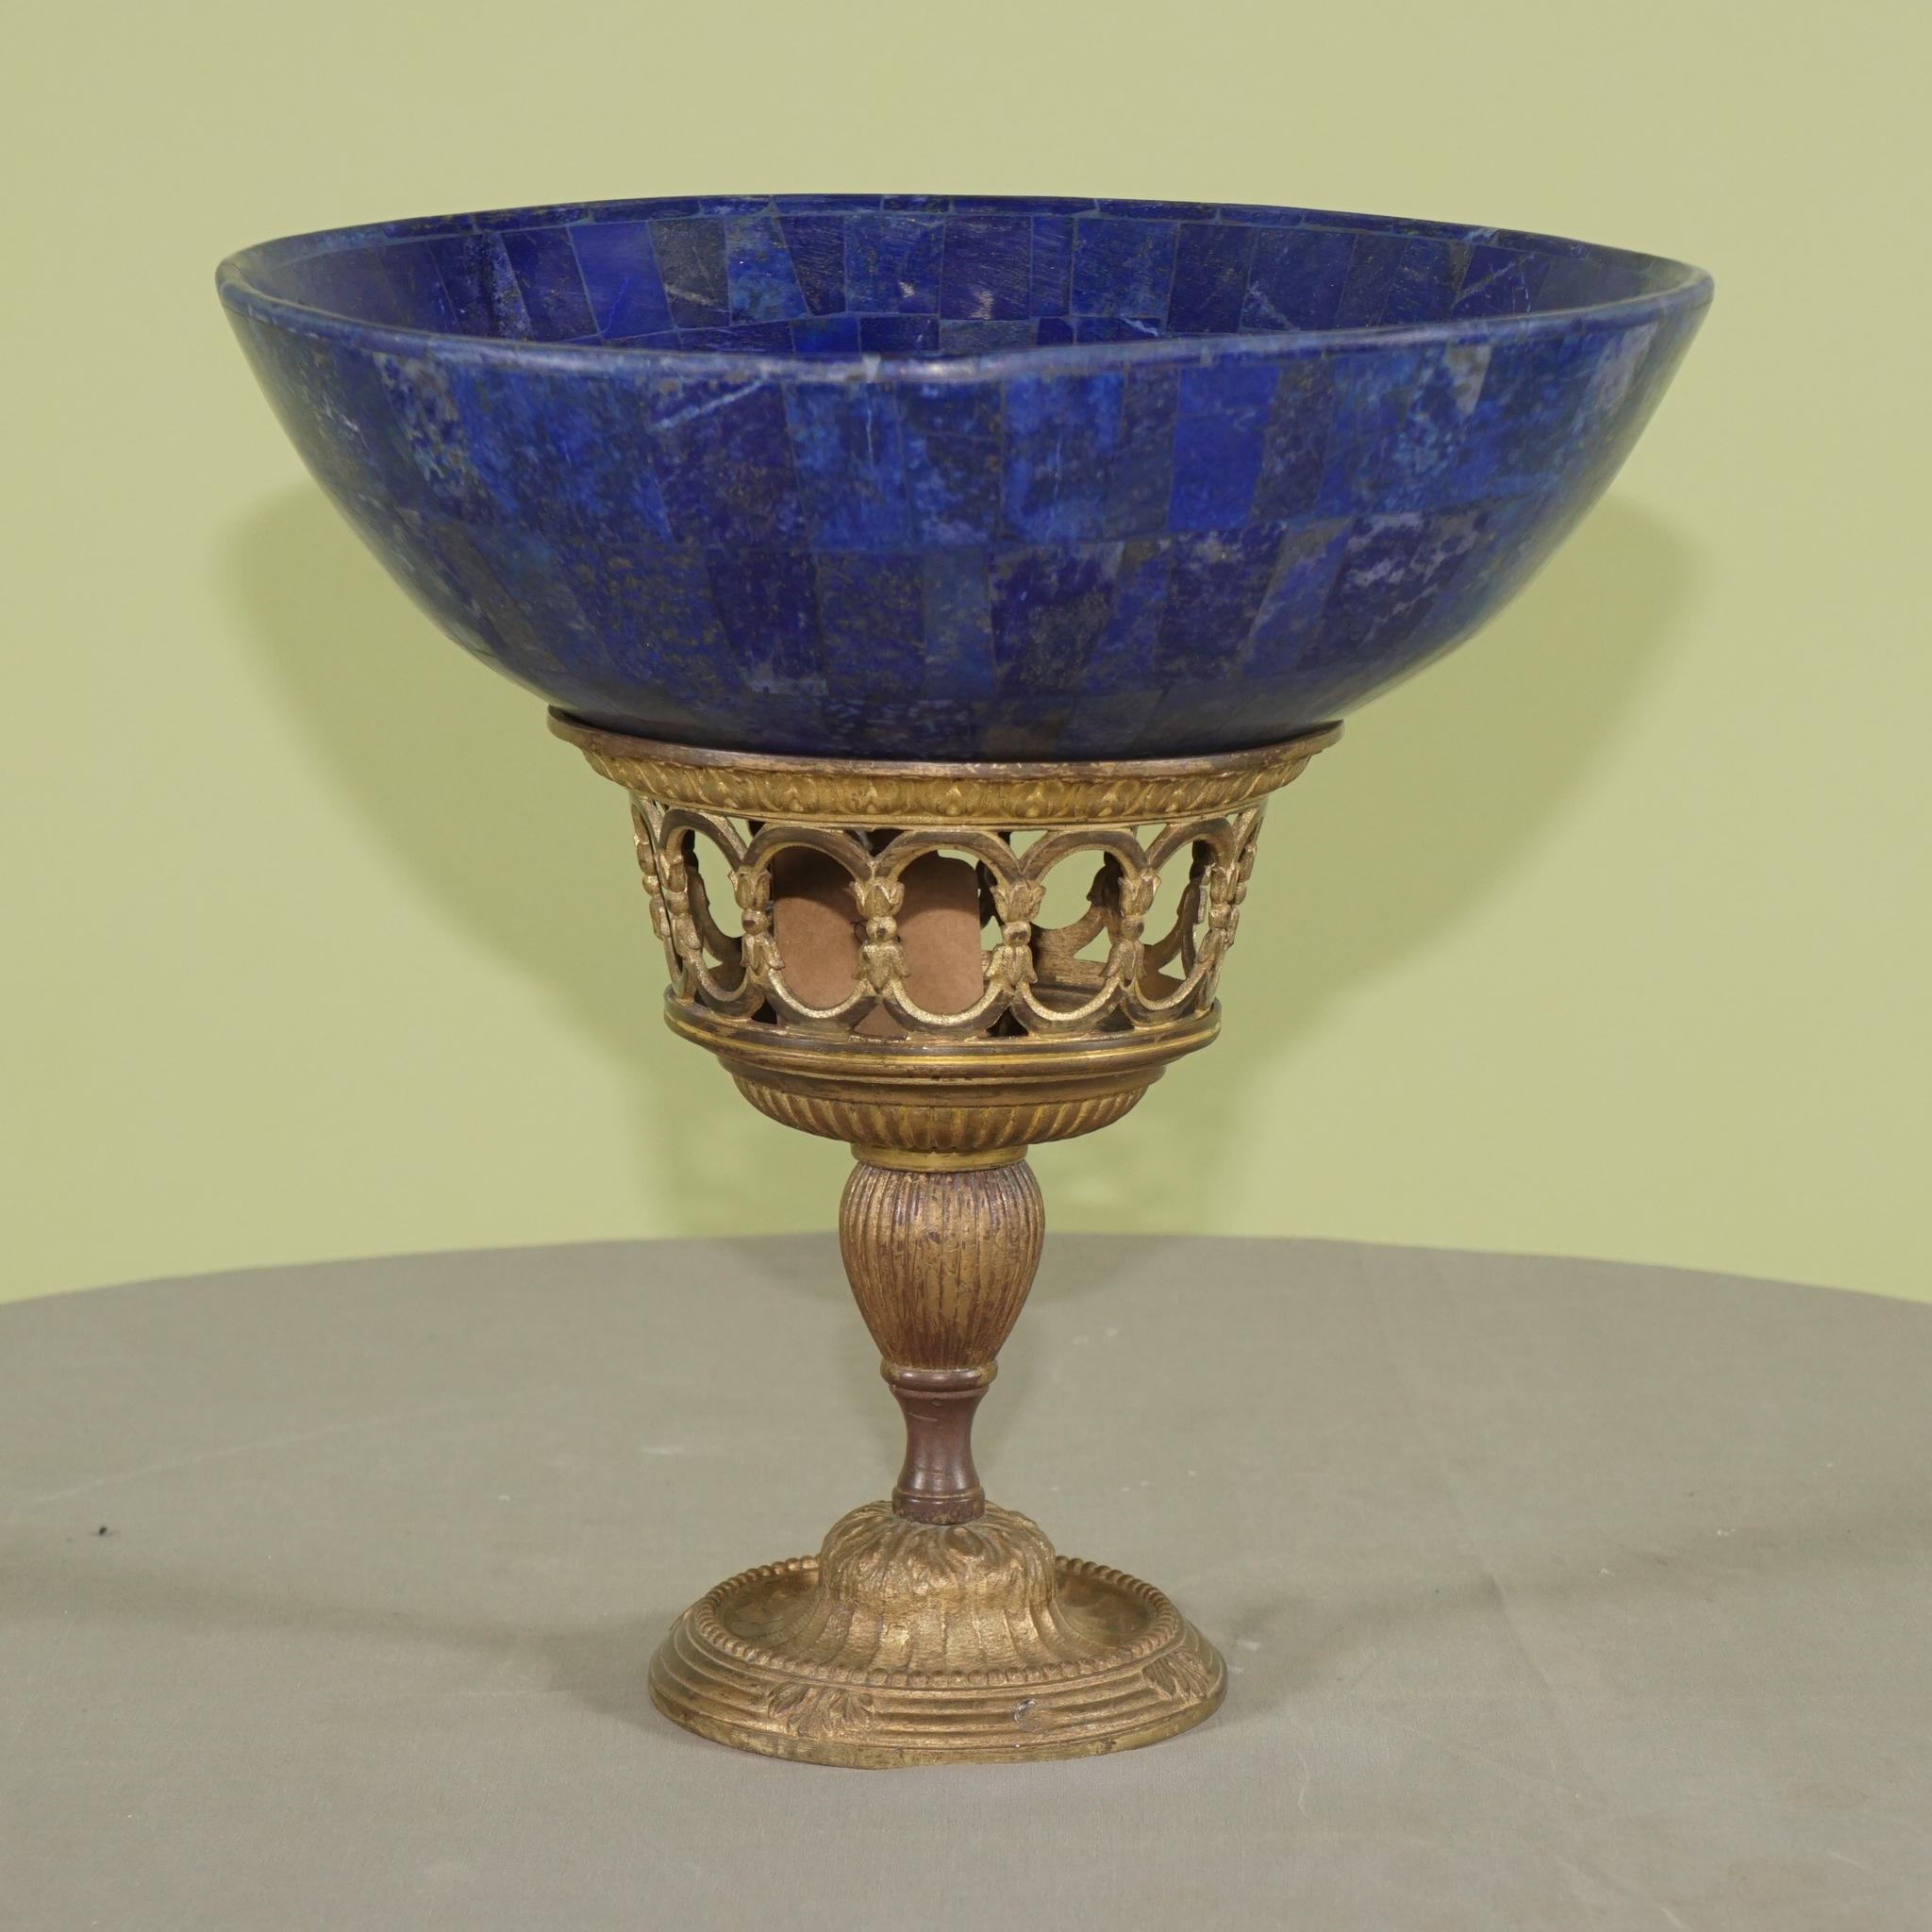 This pair of bowls made of lapis lazuli in the 20th century are set up on older gilded bronze stands. They are made not from the solid but veneered in the manner of Russian furniture, urns or columns and other table top accessories made in the 18th